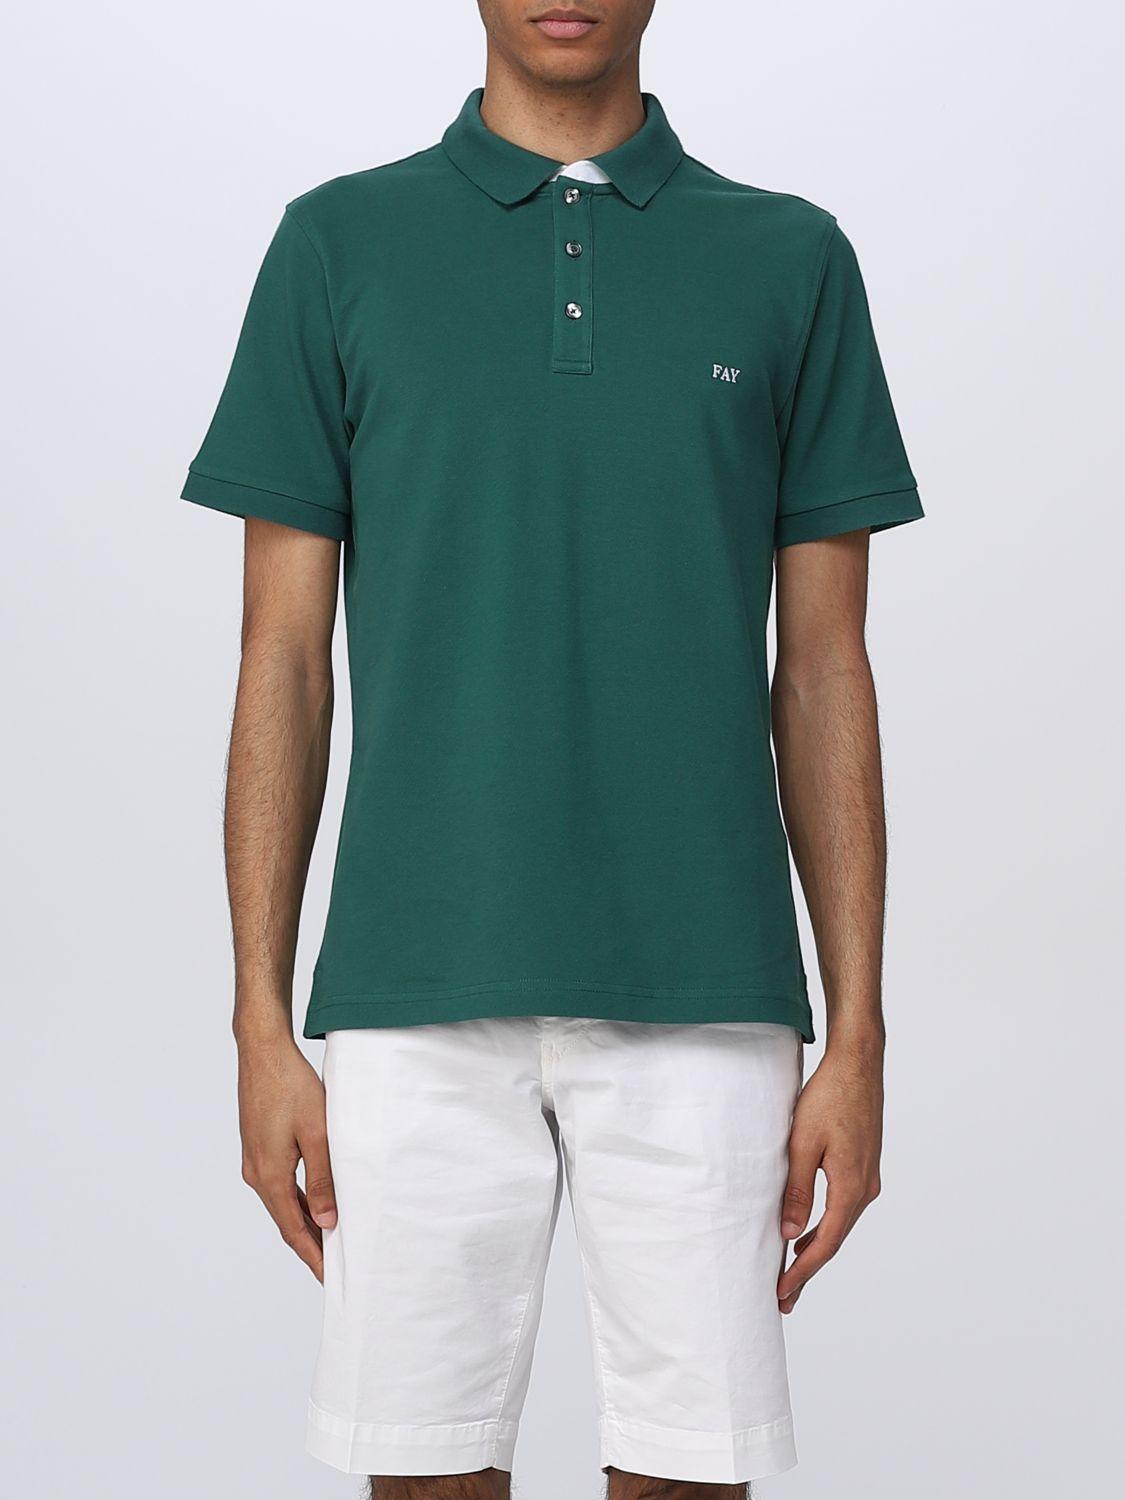 Fay Polo Shirt in Green for Men | Lyst